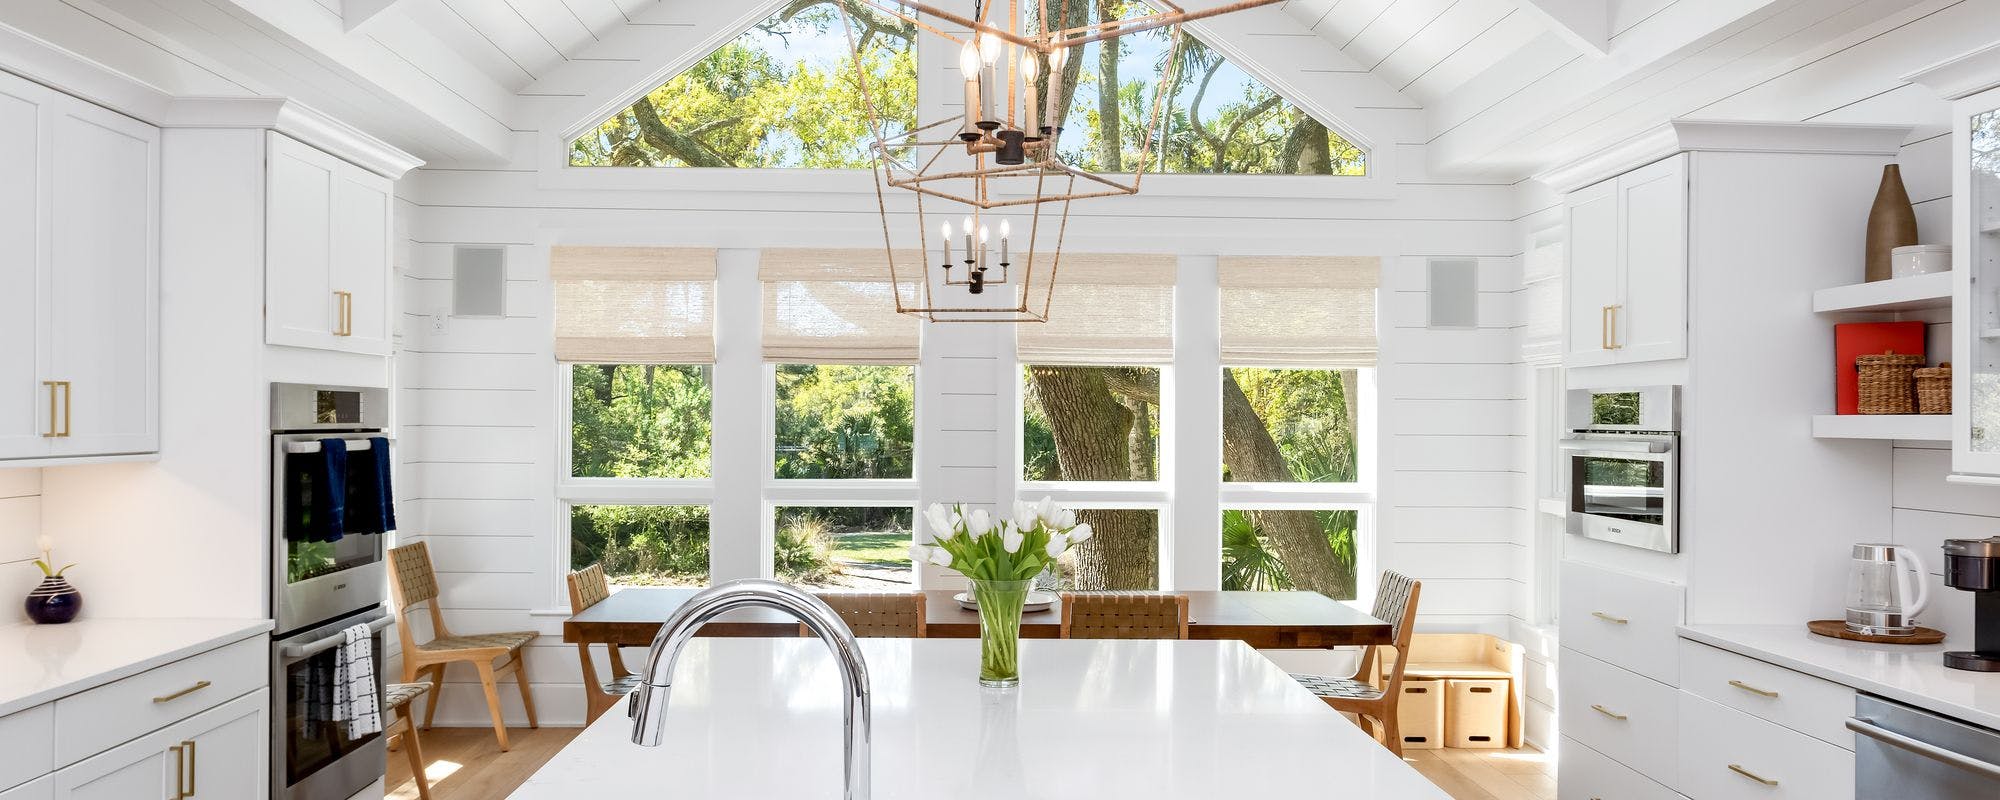 Airy and open kitchen at a Kiawah Island vacation rental.